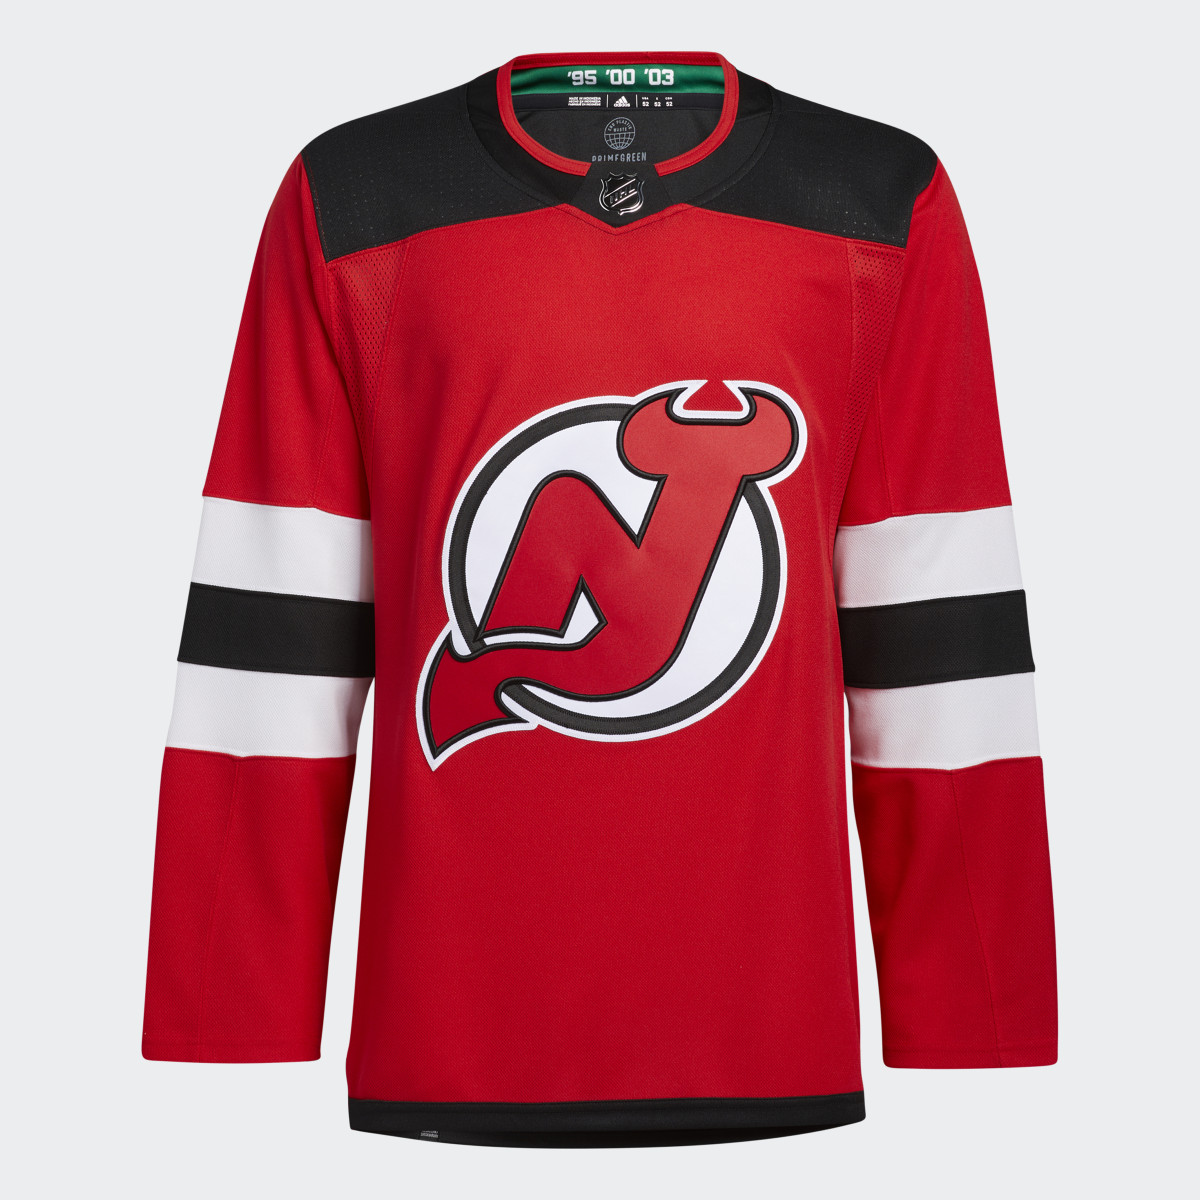 Adidas Devils Home Authentic Jersey. 5